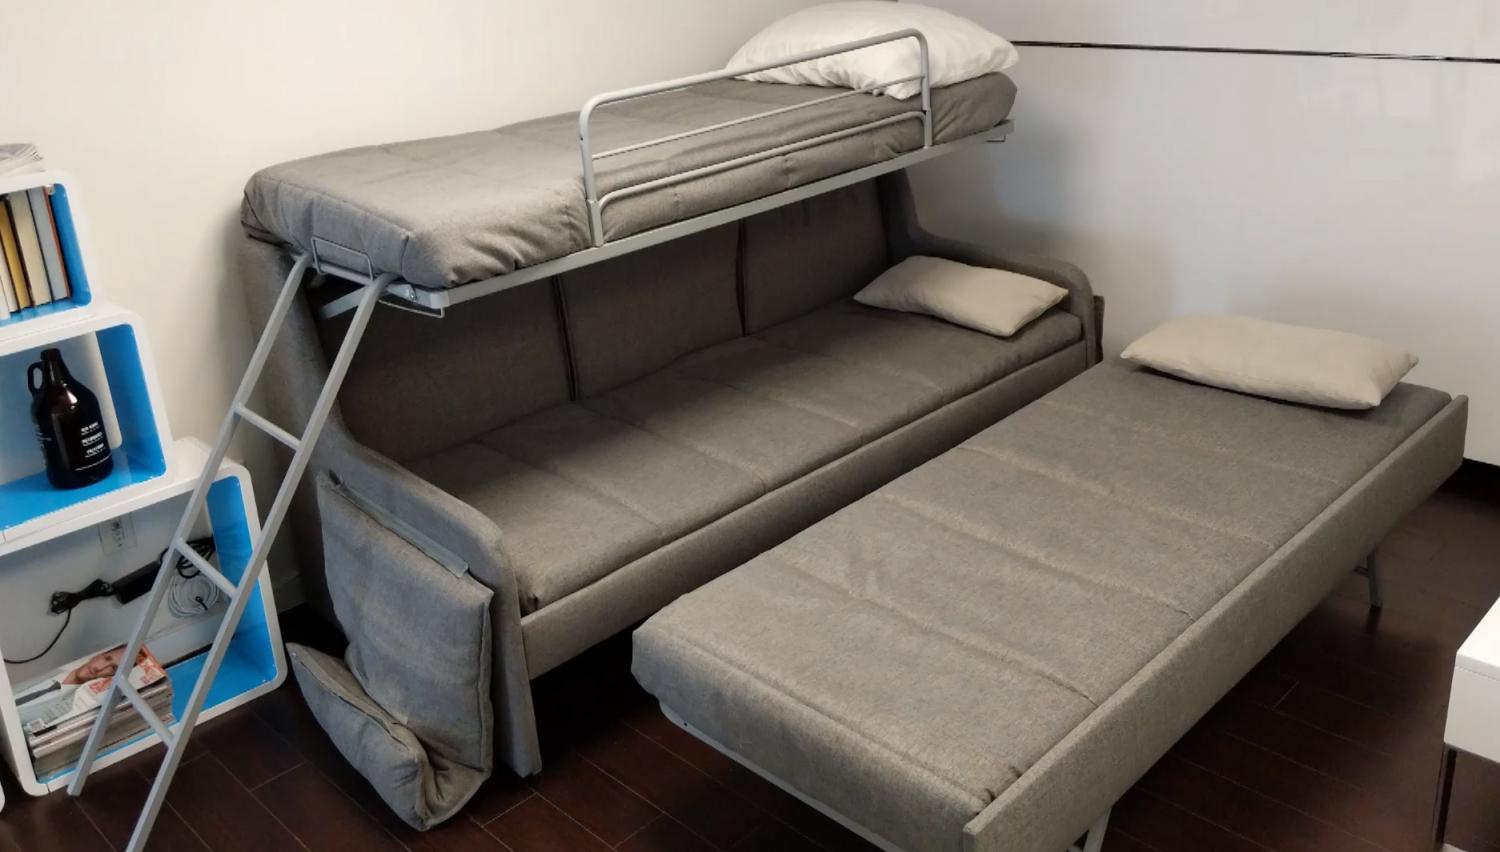 Grey colored Transforming Bunk Bed That Sleeps For 3 in a small room